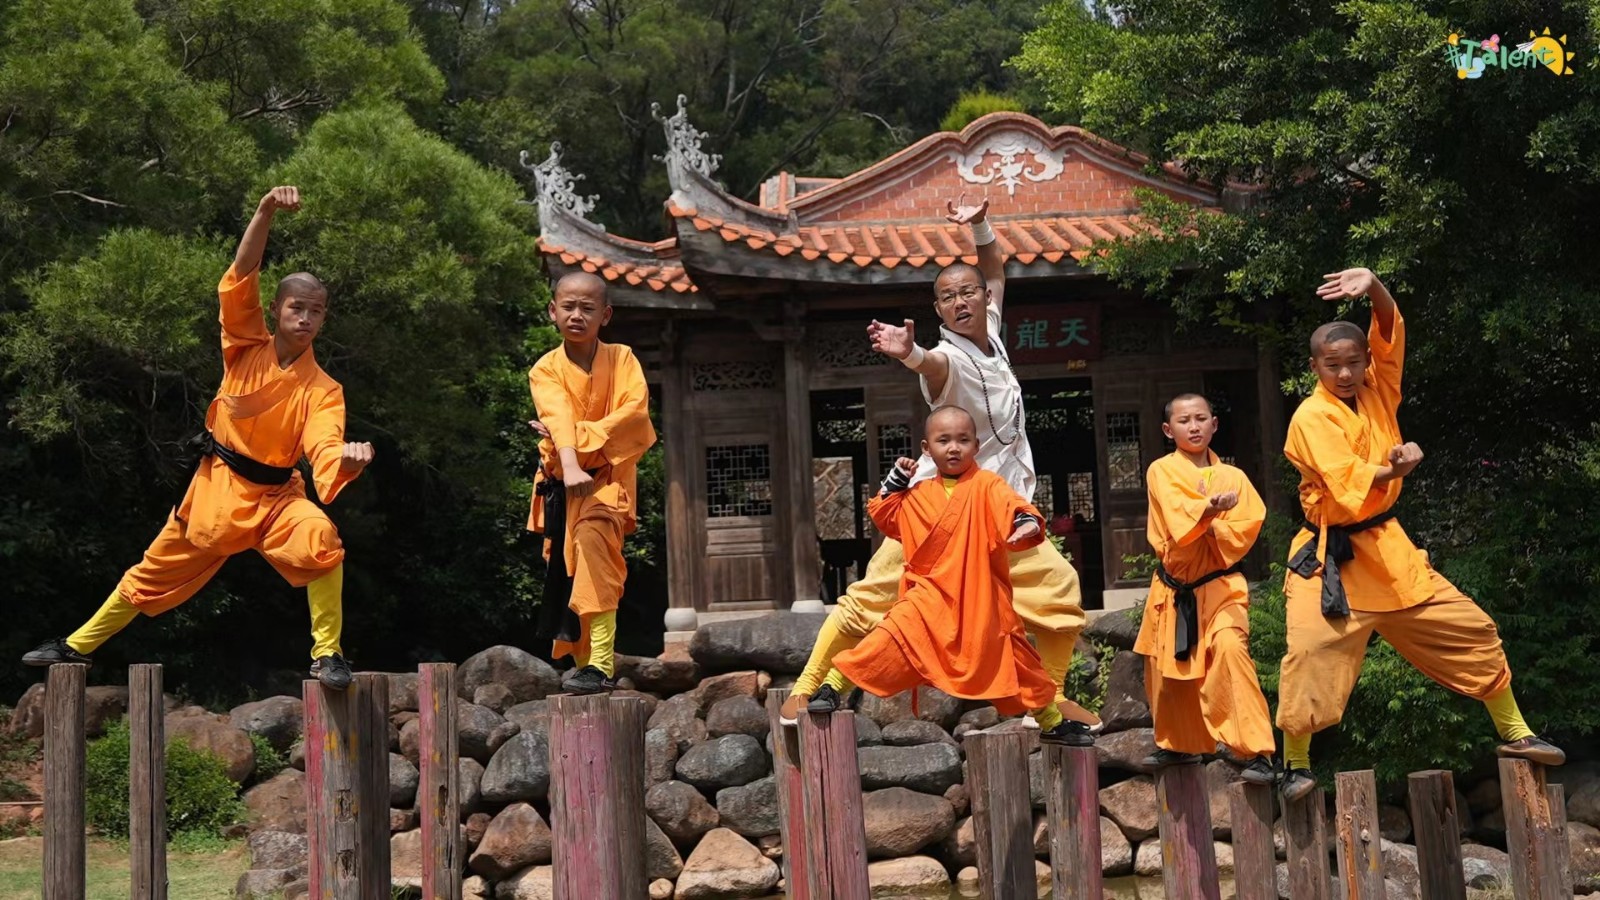 Kung Fu Show at the Shaolin Temple